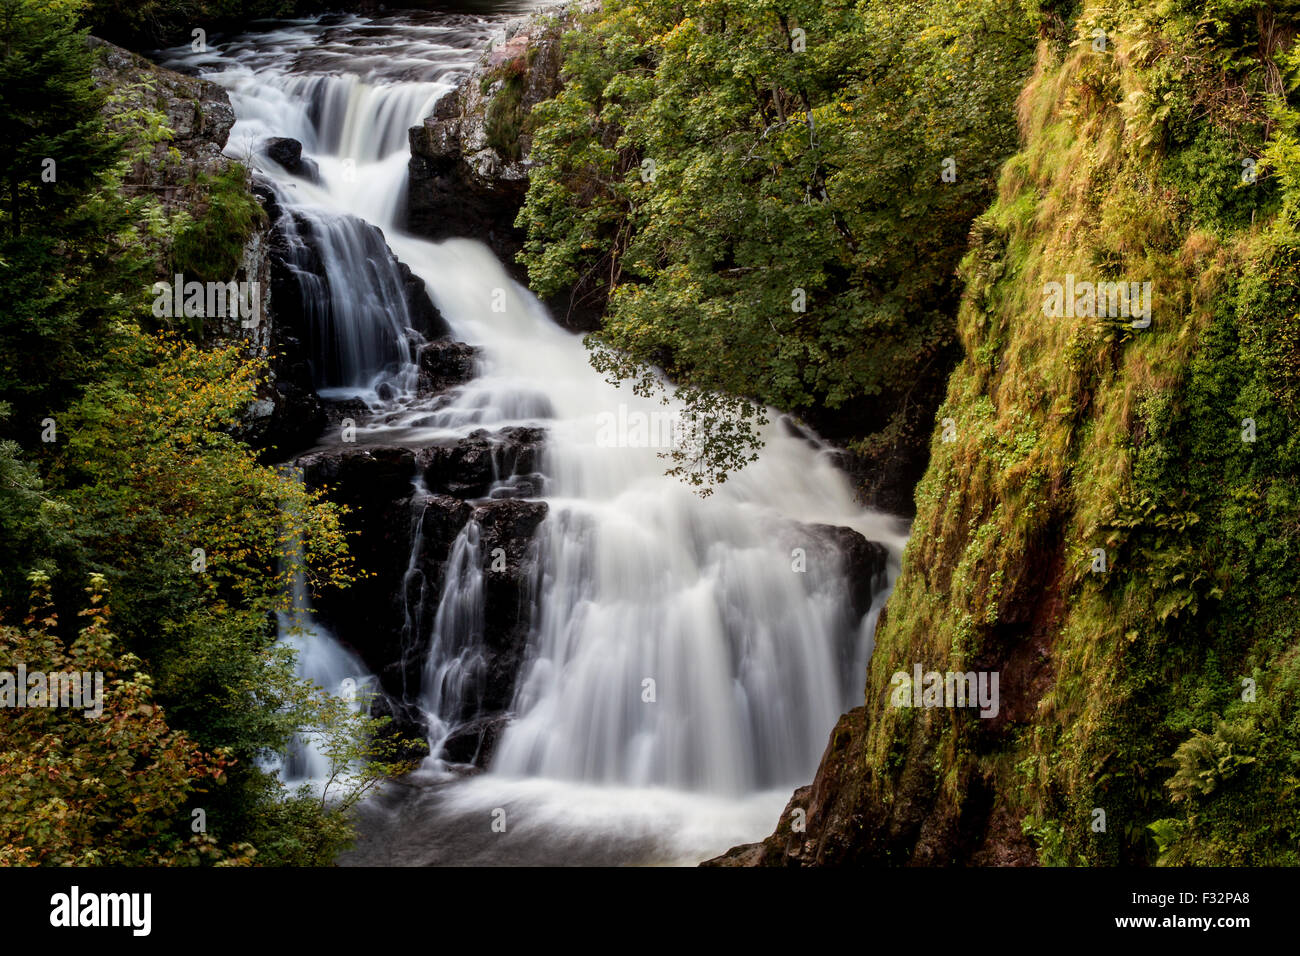 Reekie Linn, Glen Isla, Angus, Scotland, UK, 28th September 2015. UK Weather: Autumn afternoon at Reekie Linn Waterfall In Glen Isla west of the Angus Glens. The beautiful scenery of Autumnal colours on trees at the misty Linn Falls in Glen Isla, Angus County. © Dundee Photographics / Alamy Live News. Stock Photo